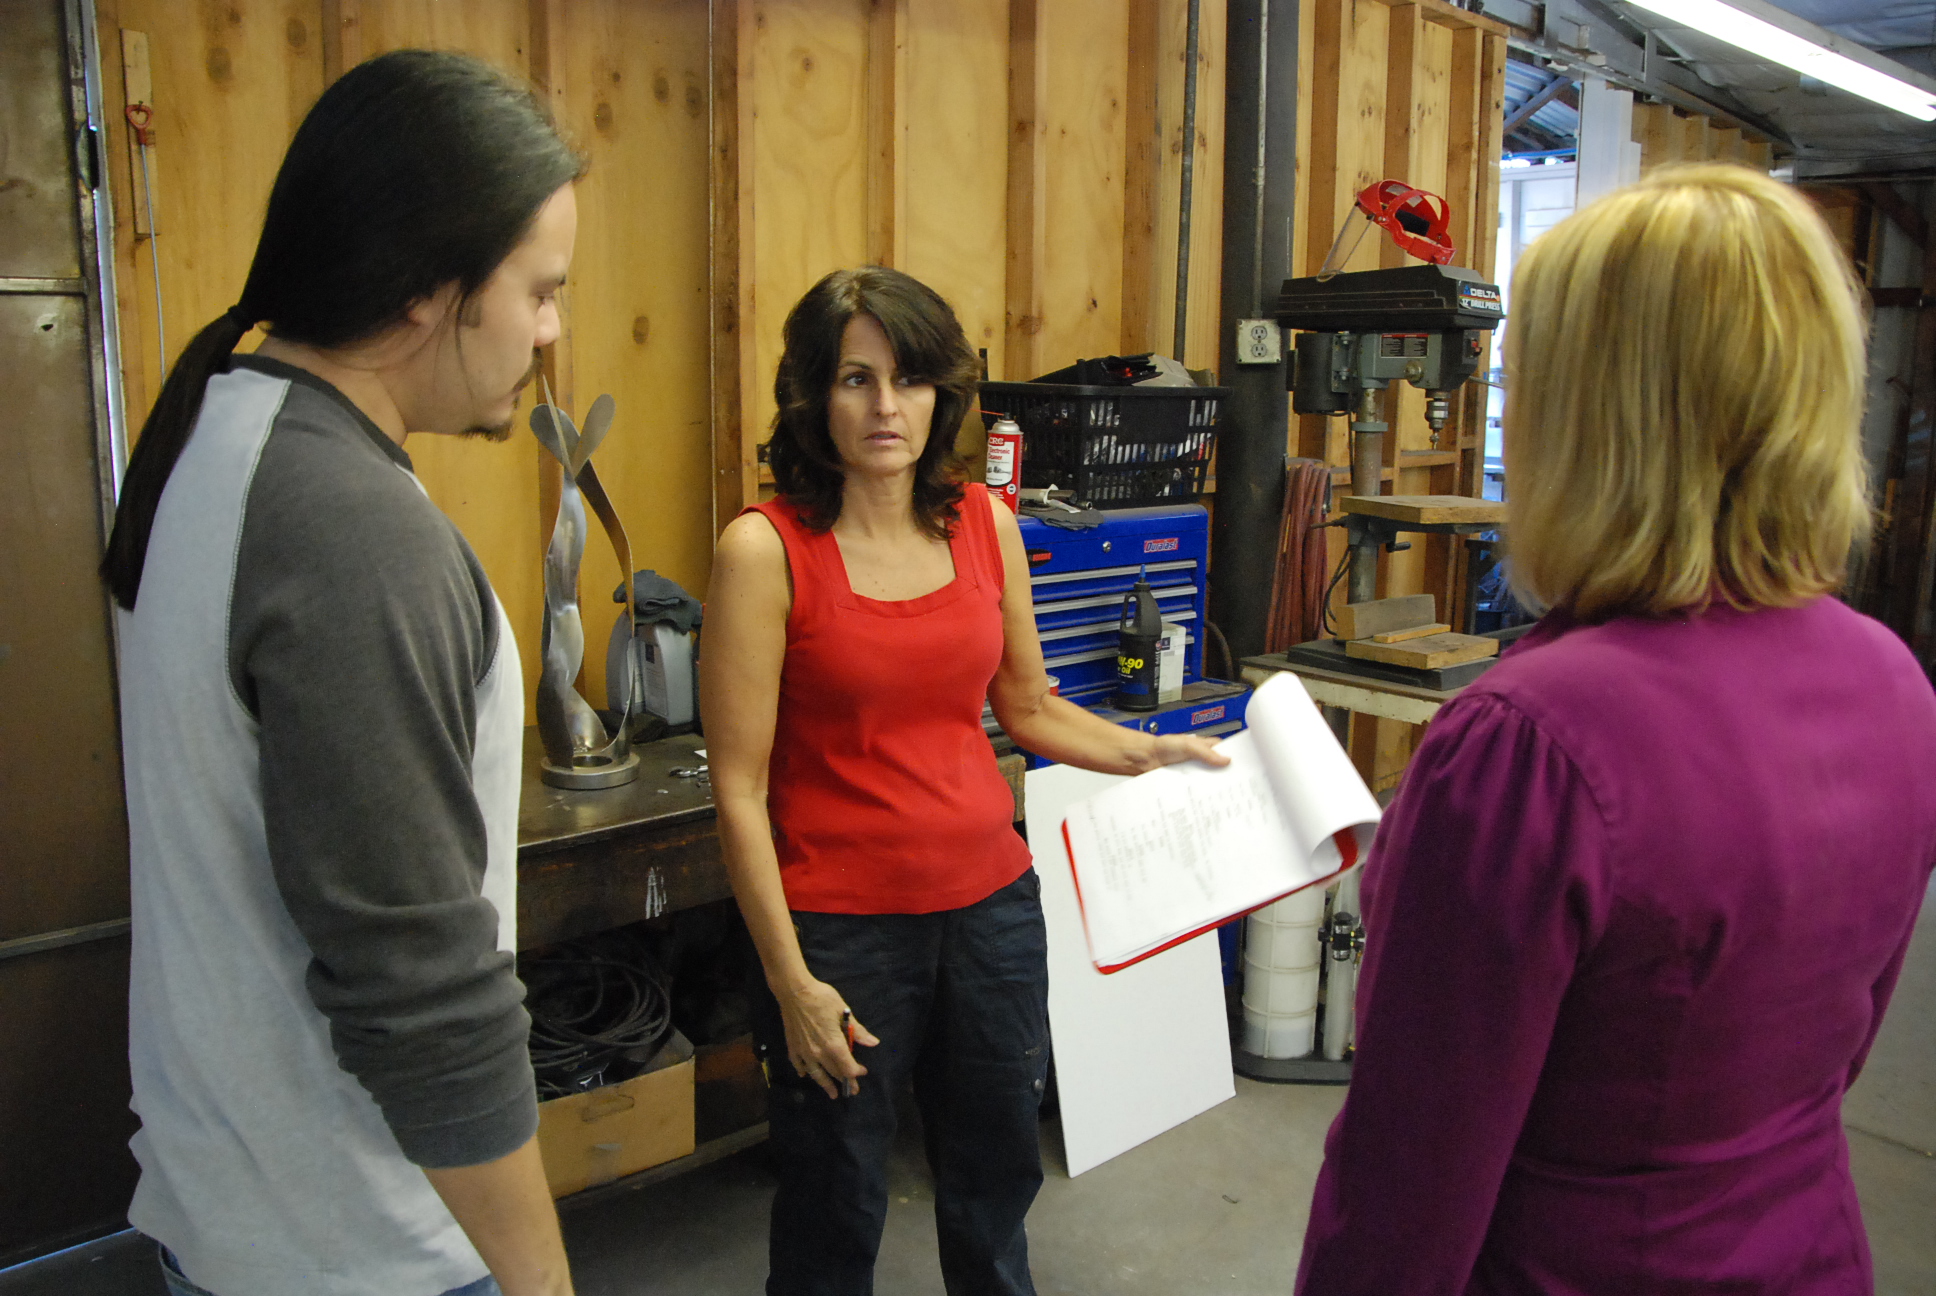 On set of SPARK - Diane M. Dresback- writer and director with Actors Kane Black and Nathalie Cadieux (2012)